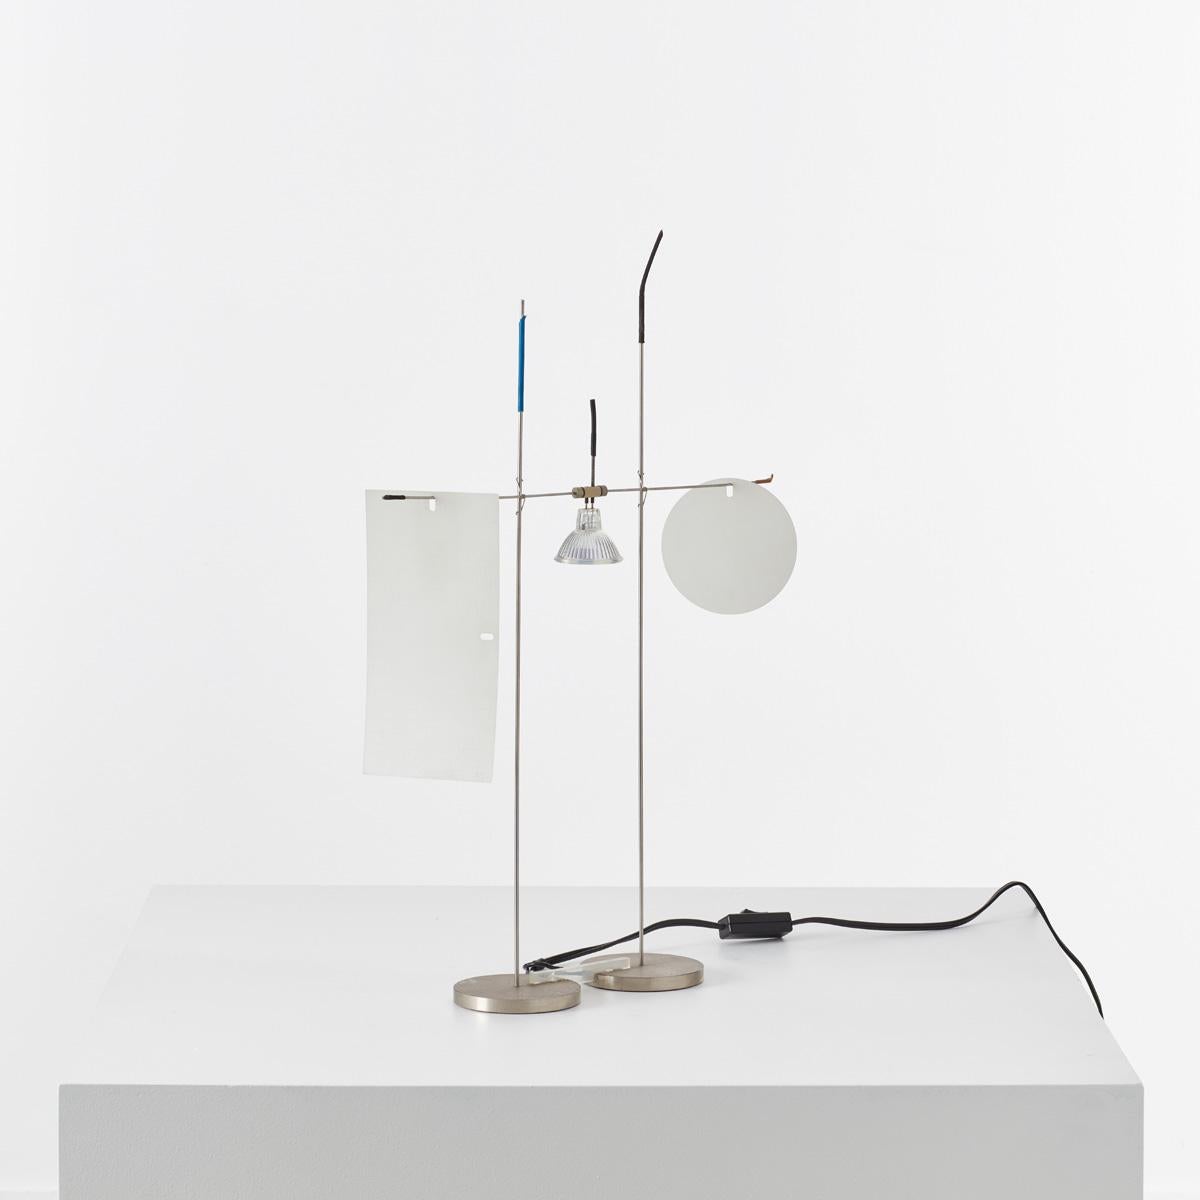 Rare out of production ‘Fukushu’ lamp by light sculptor Ingo Maurer. Height of the light source is adjustable.

Nickel-plated metal and PVC. Full working condition, minimal wear.

Measures: H58 W34cm

F084.
  